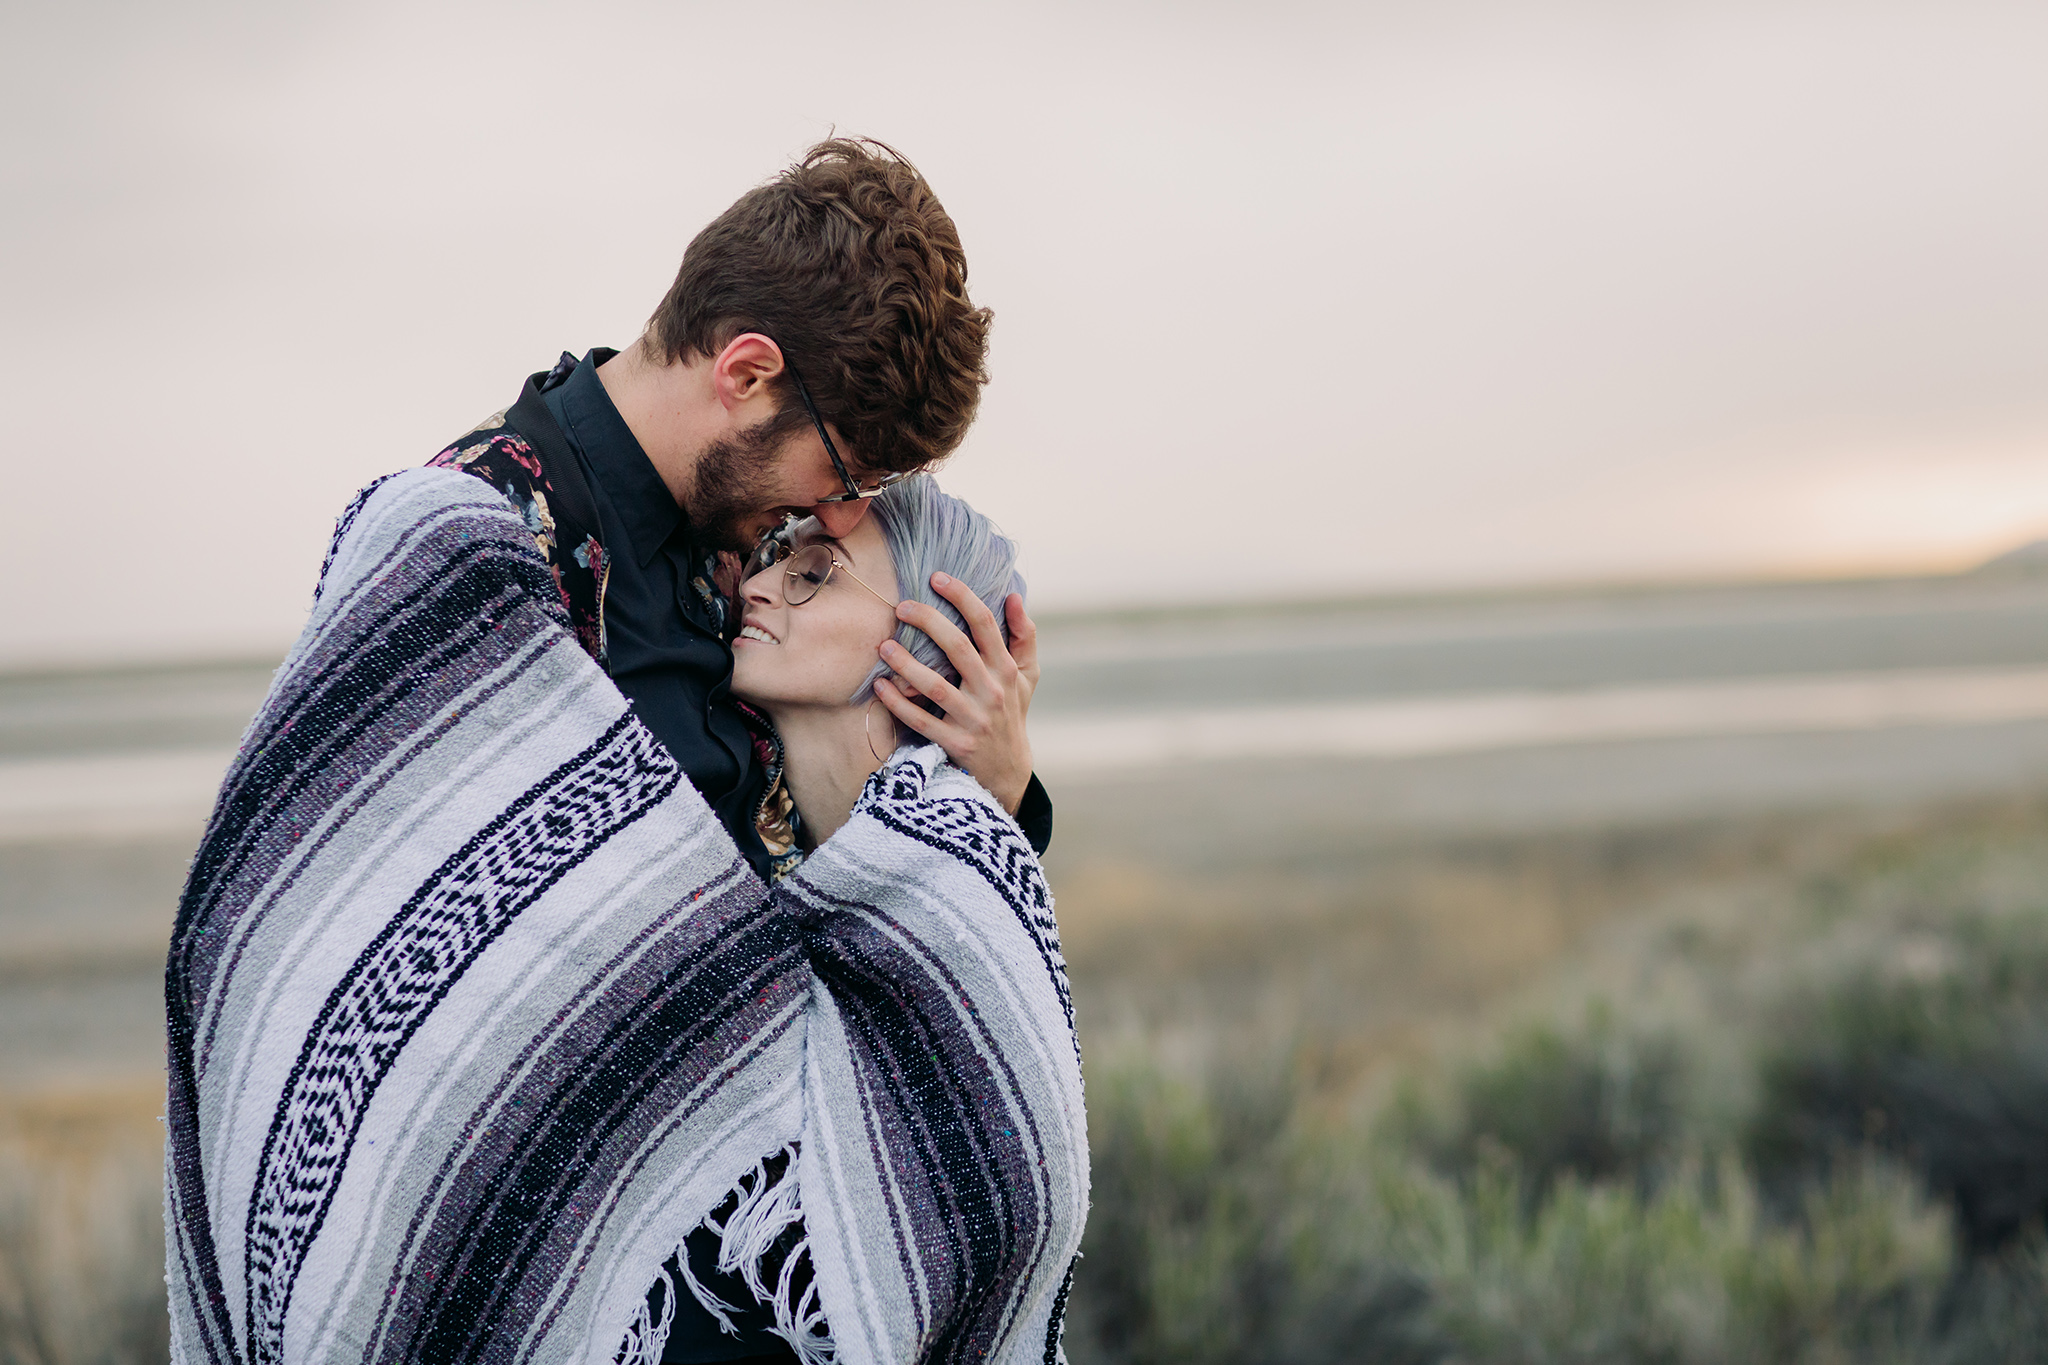 Great Saltair engagement couples photos on a stormy evening near Salt Lake City Utah Stylish couple with outfits inspiration for engagement photos by ENV Photography